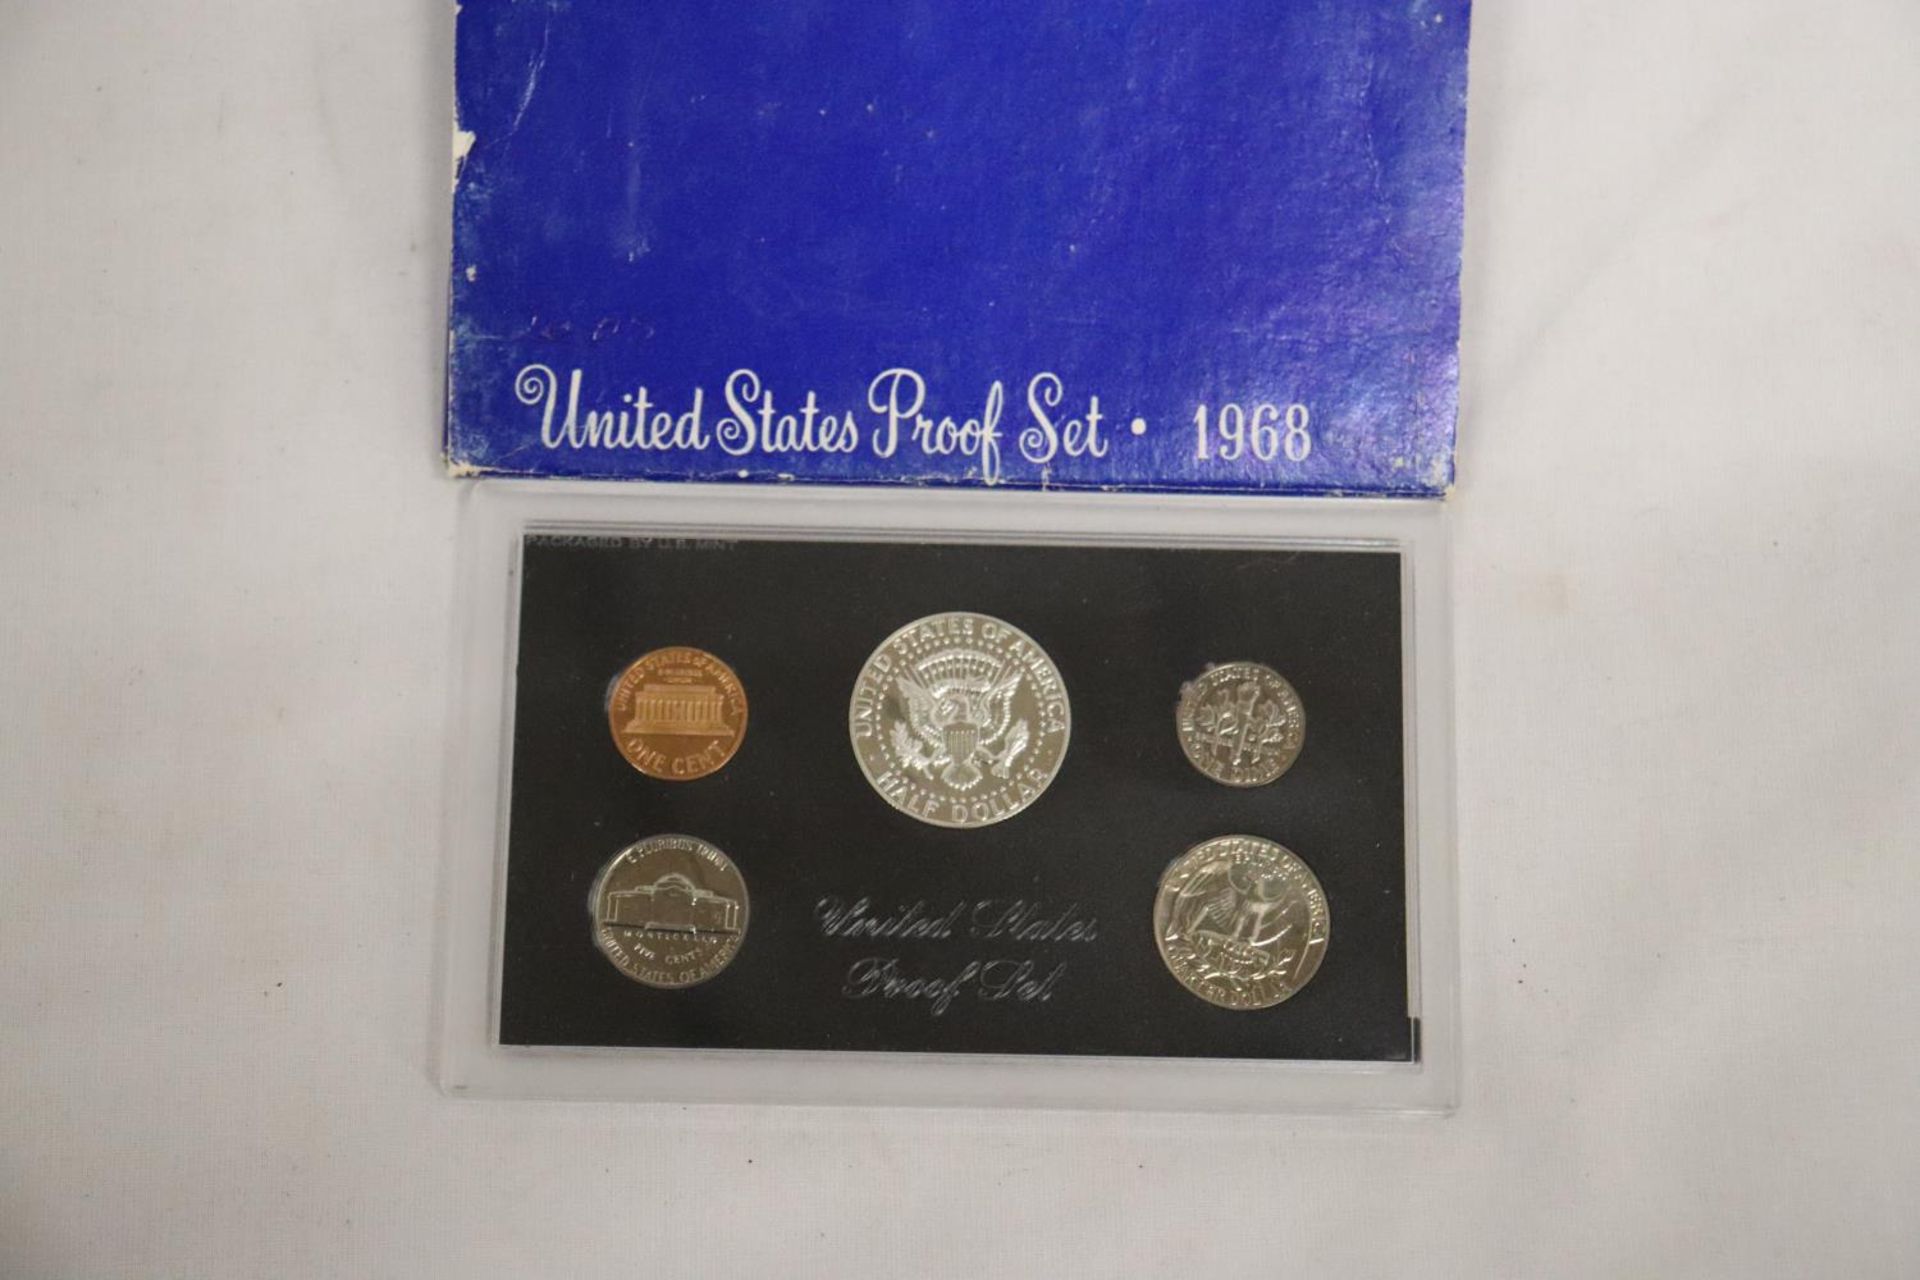 A 1968 UNITED STATES PROOF SET OF COINS - Image 4 of 5